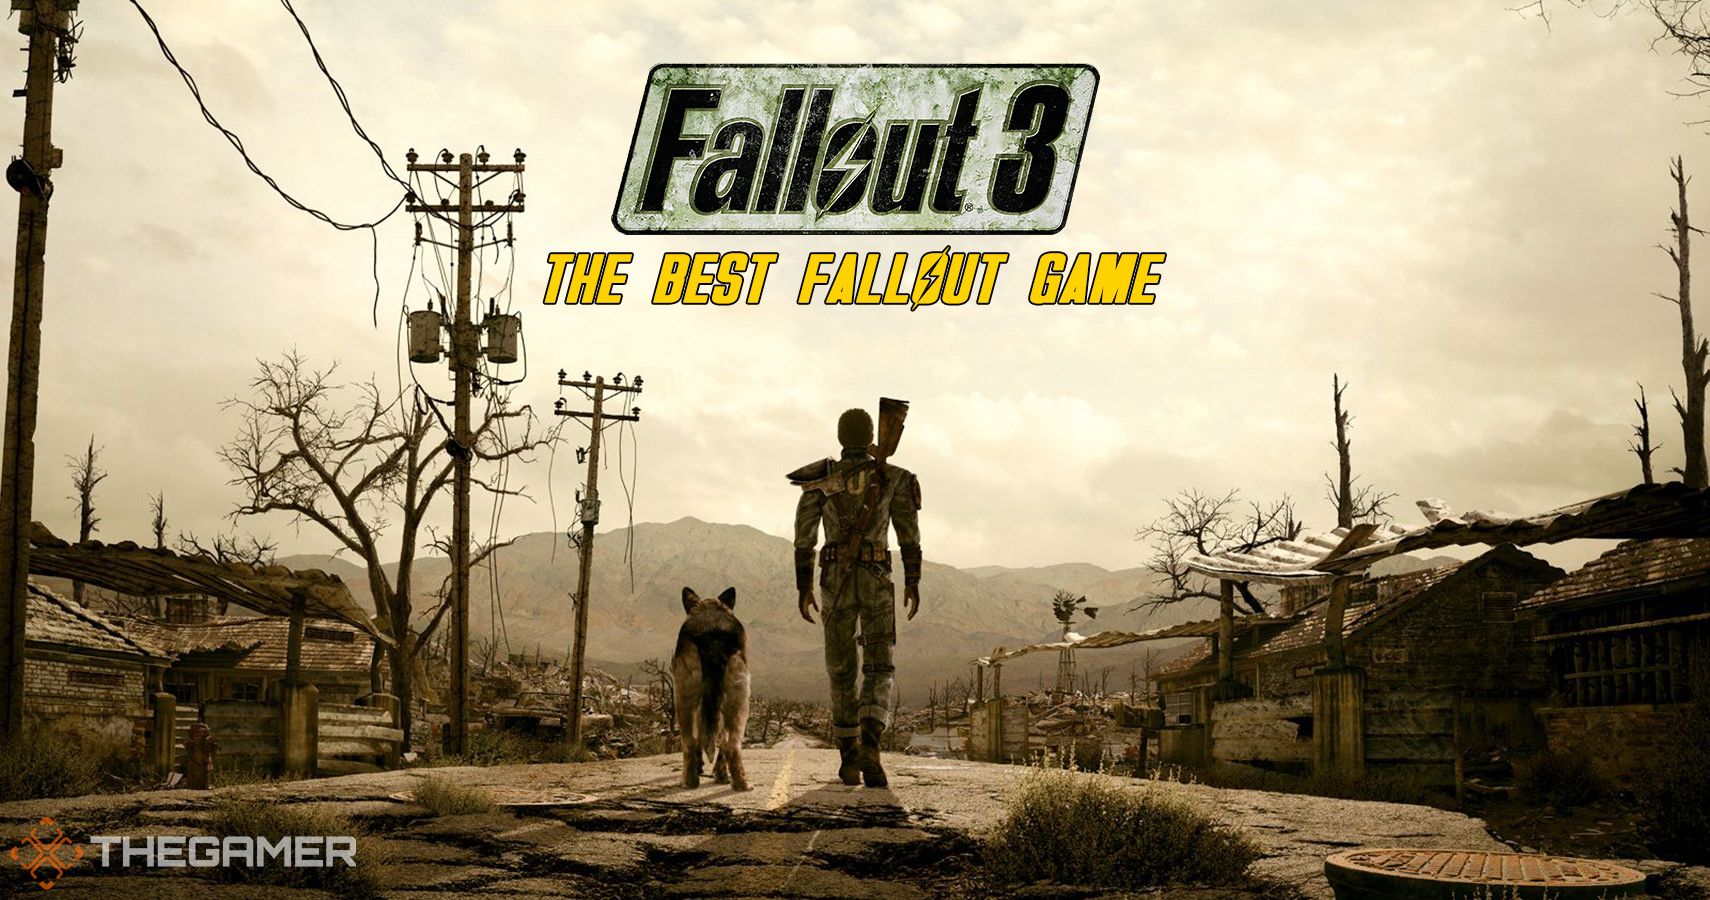 Fallout 3 Is The Best Fallout Game – Here’s Why